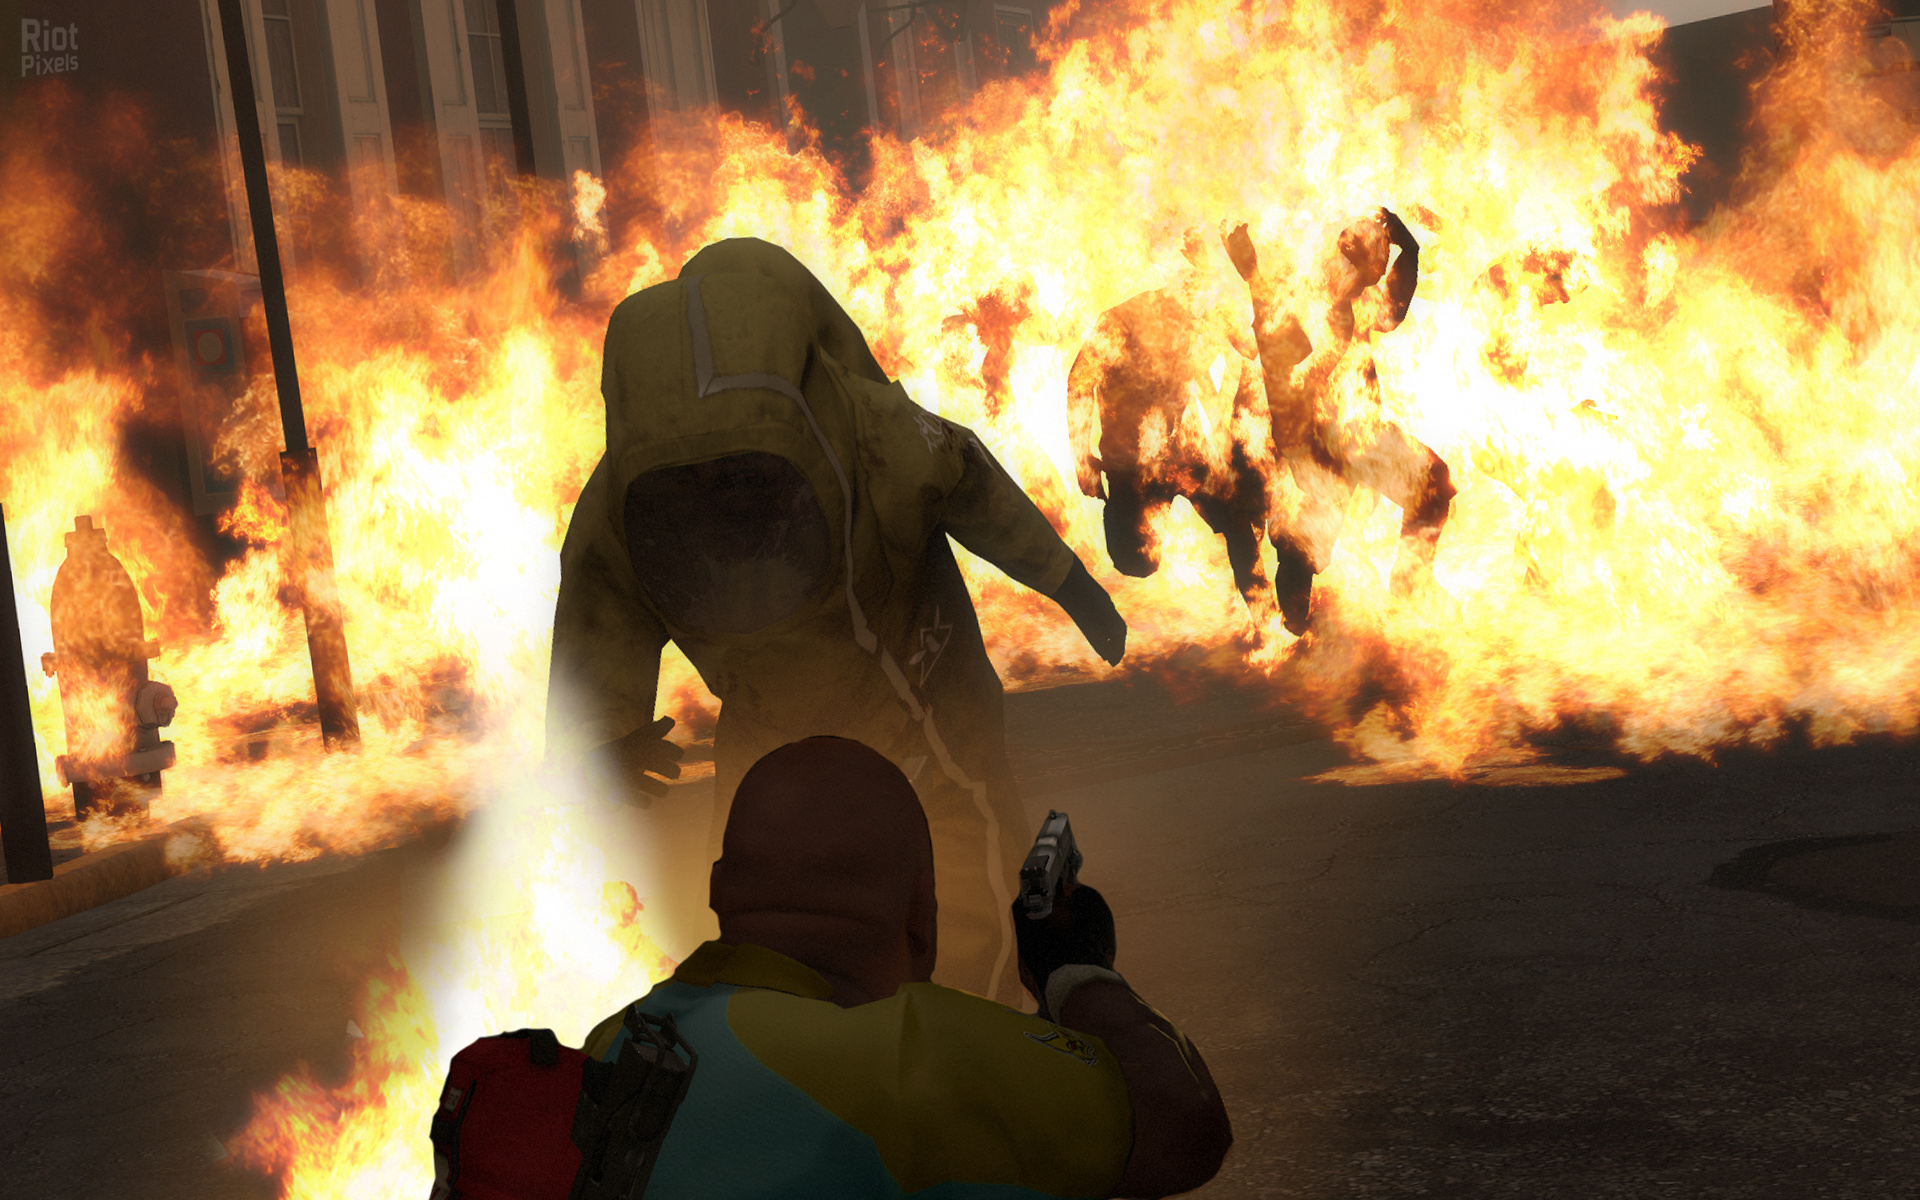 left 4 dead 2 torrent that works with steam multiplayer